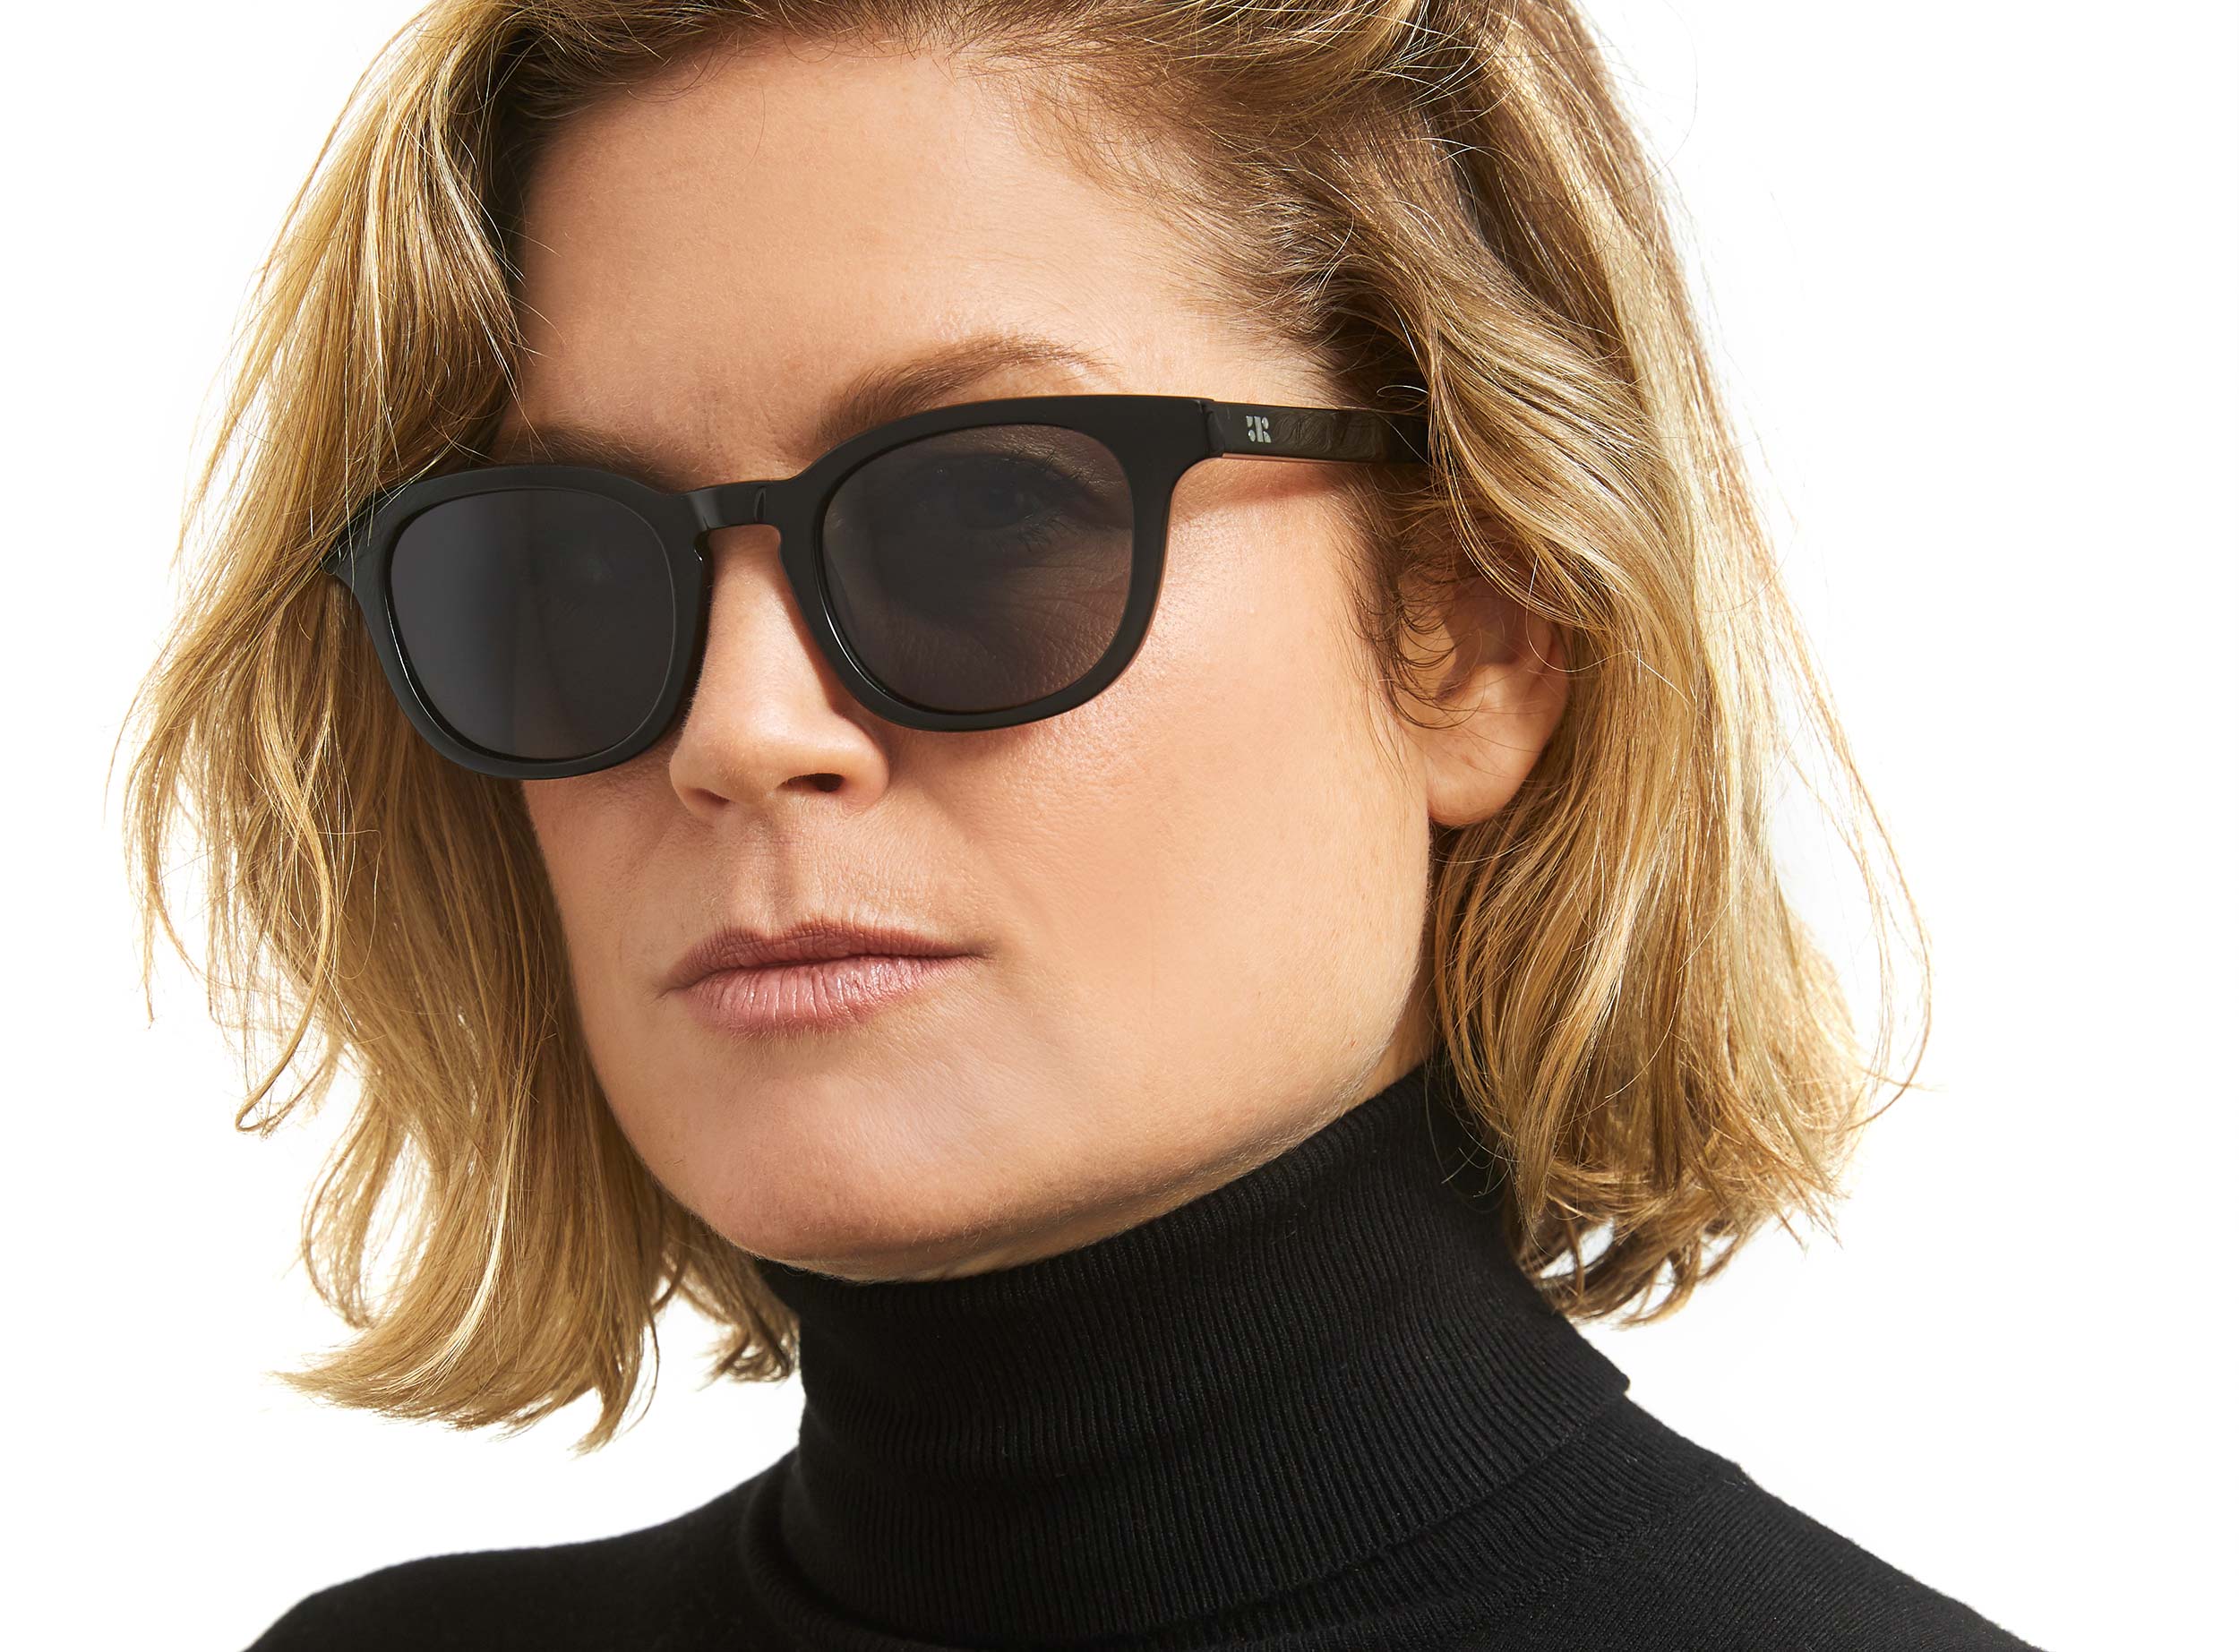 Photo of a man or woman wearing Sinclair Sun Royal Sun Glasses by French Kiwis